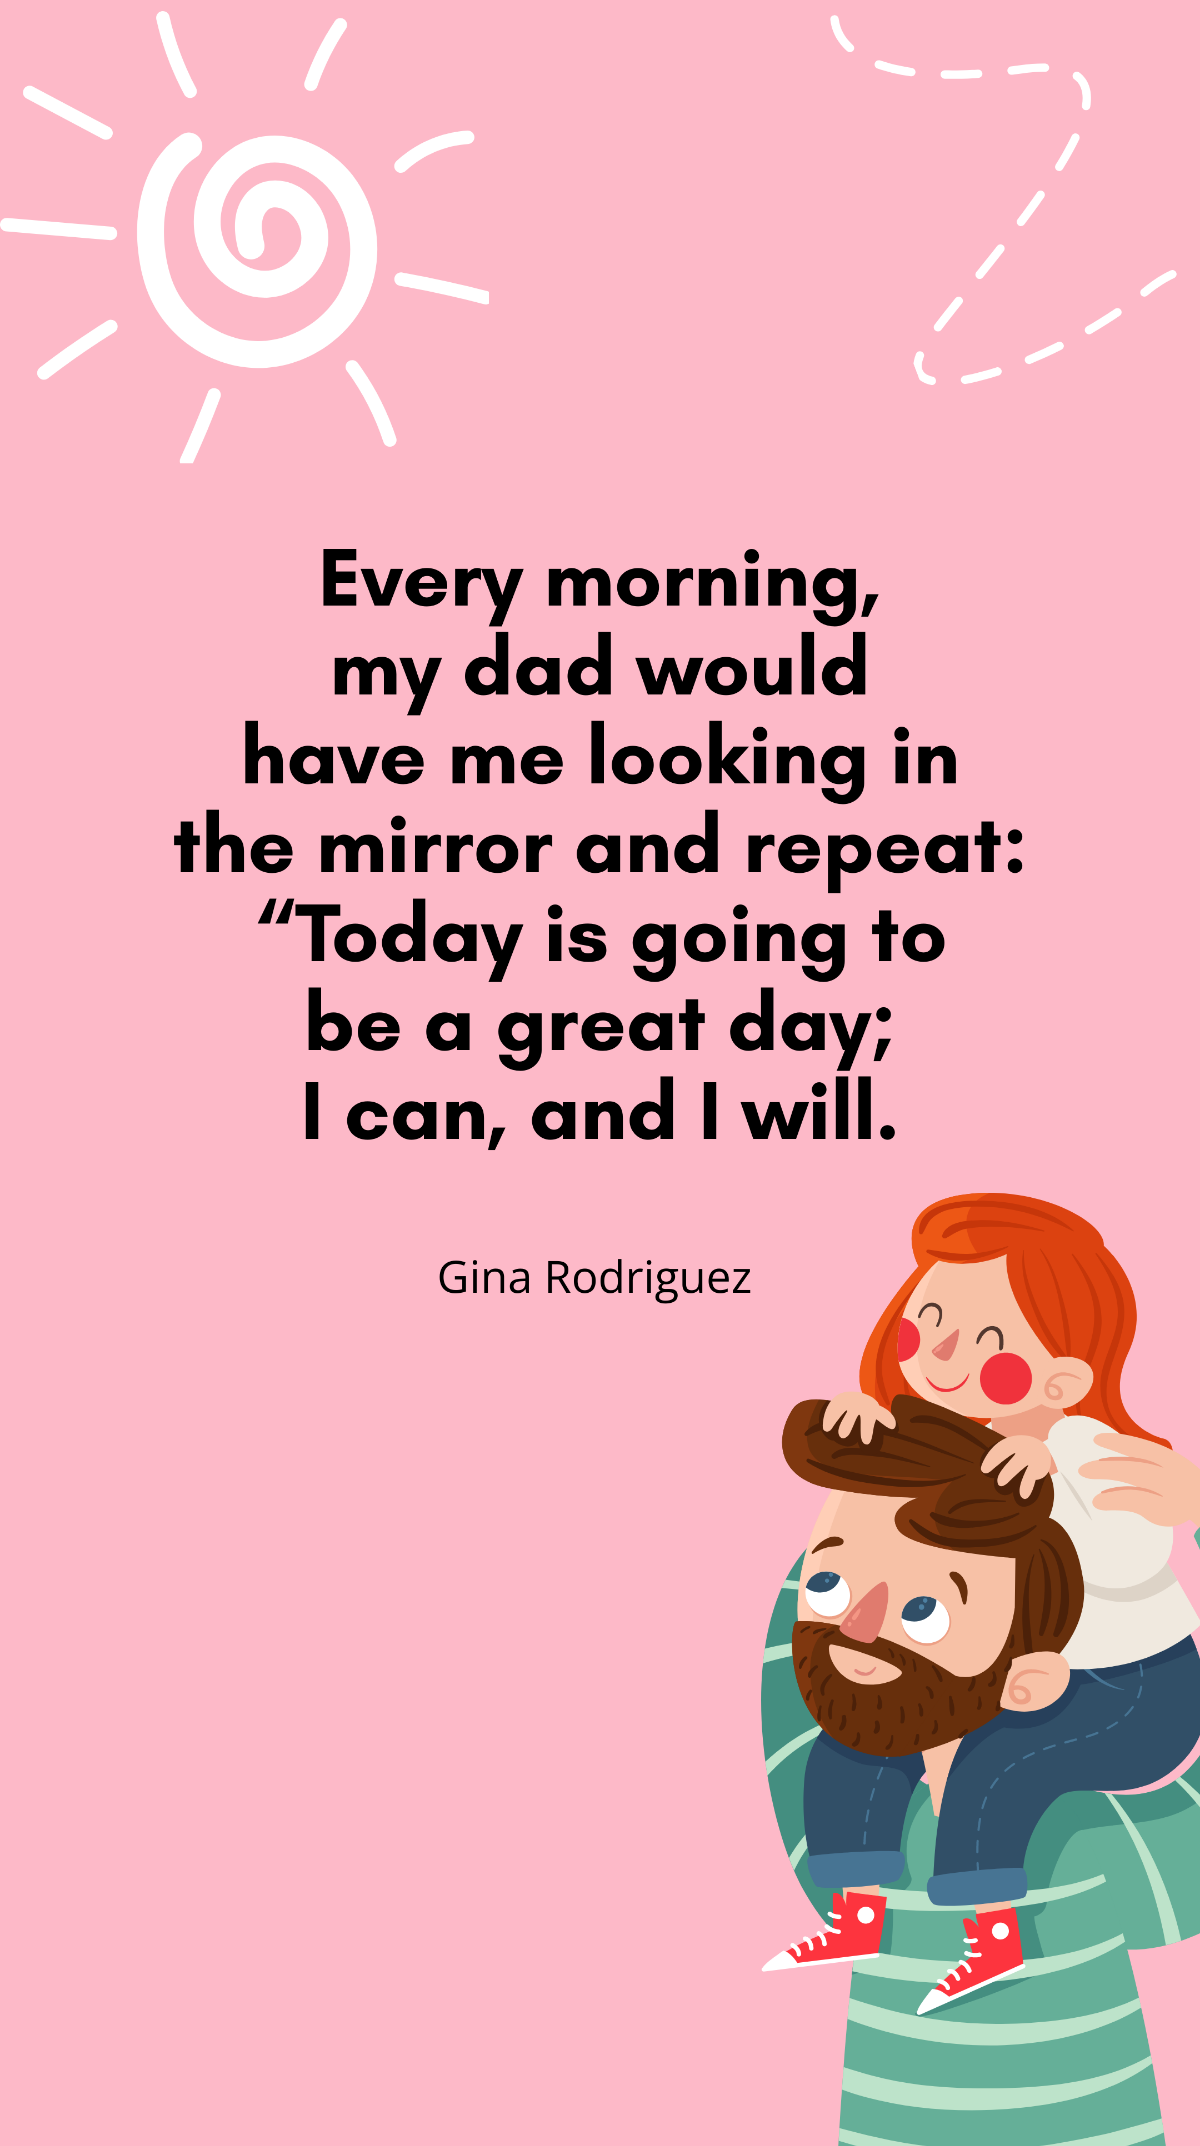 Gina Rodriguez - Every morning, my dad would have me looking in the mirror and repeat: “Today is going to be a great day; I can, and I will. Template